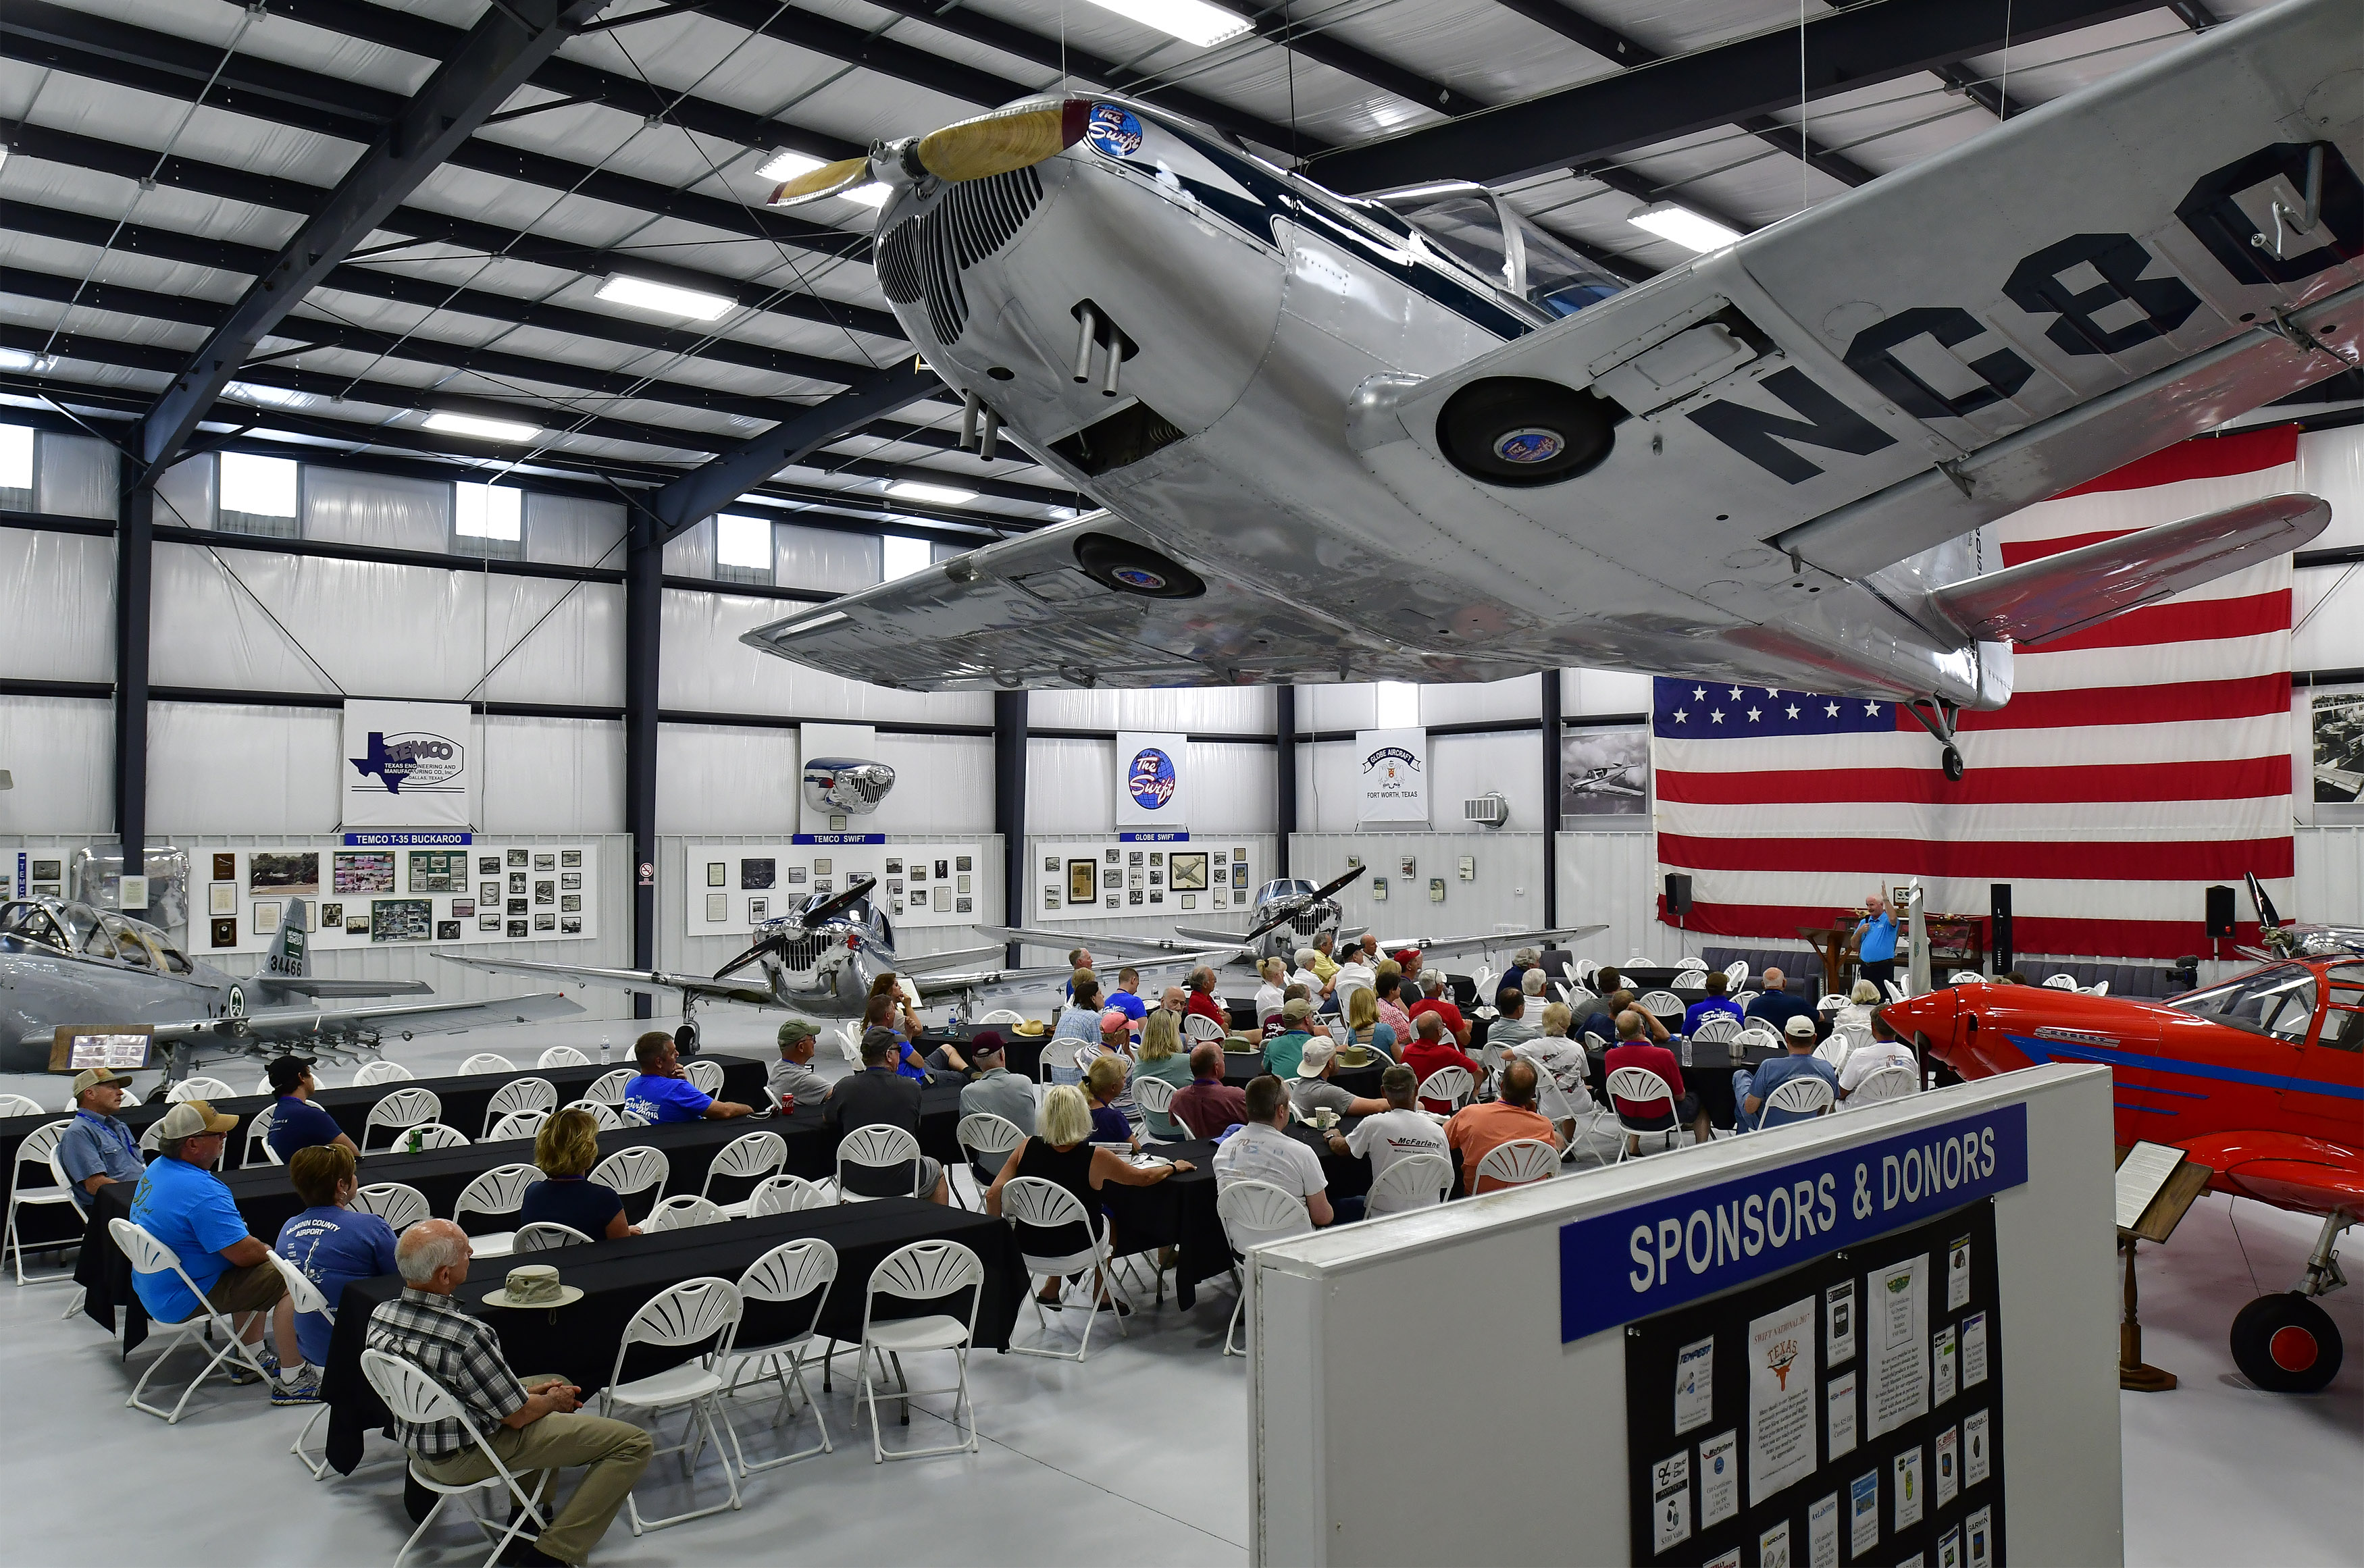 The third Swift aircraft built provides a dramatic backdrop during the 2018 Swift National fly-in to the Swift Museum Foundation June 7 to 10 in Athens, Tennessee. Photo by David Tulis.